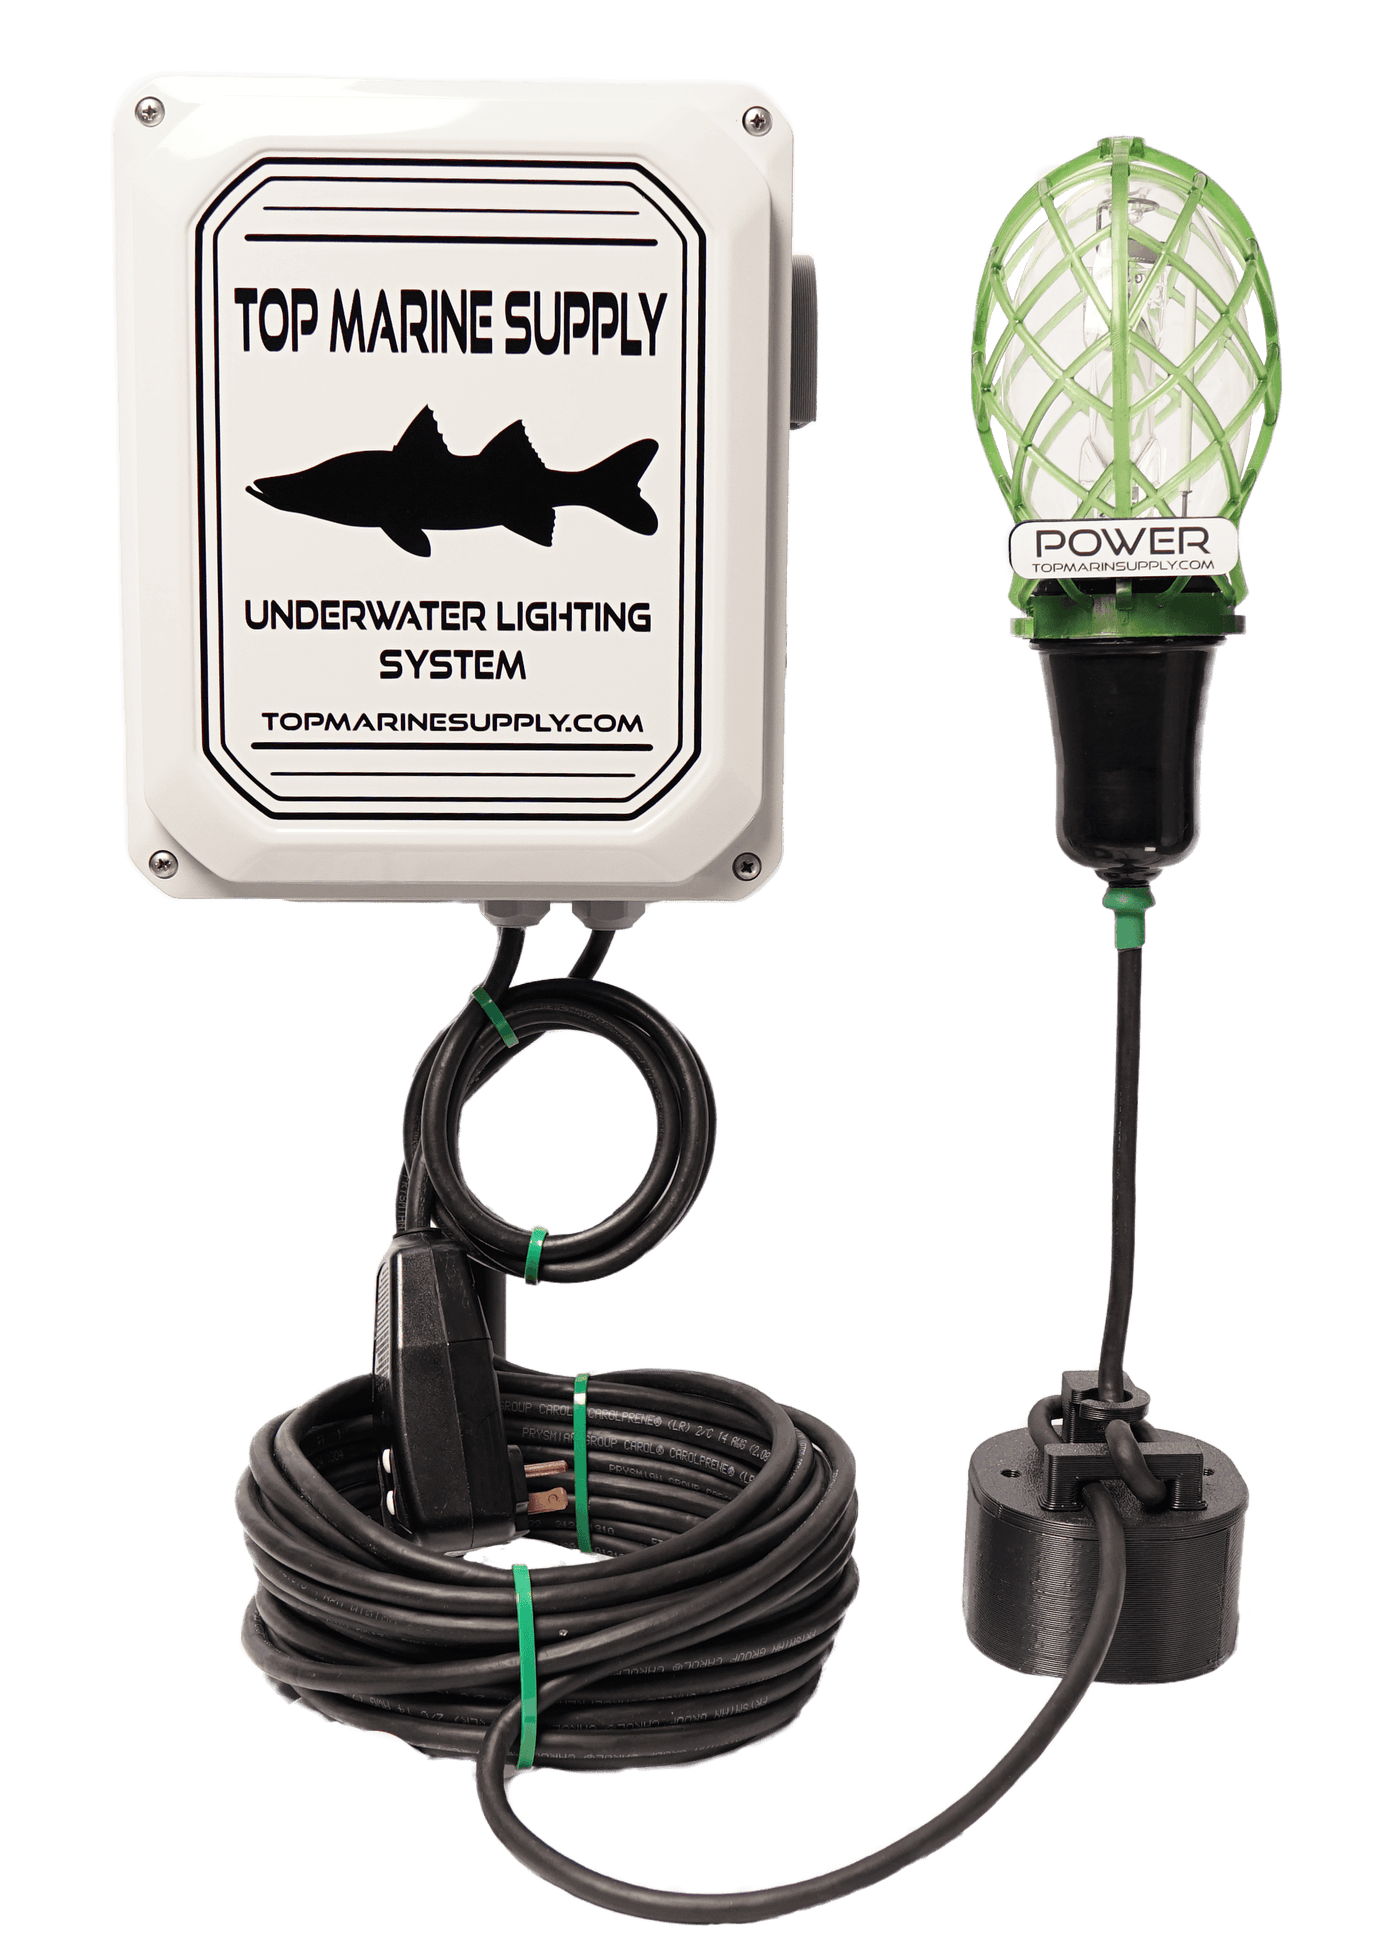 Power 400 Watt Underwater Dock Light - Single Bulb Single Bulb 400 Watt Underwater Dock light Underwater dock lights attract marine life and provide an aquarium like experience at your dock. Small fish are attracted to the illuminated marine life and this